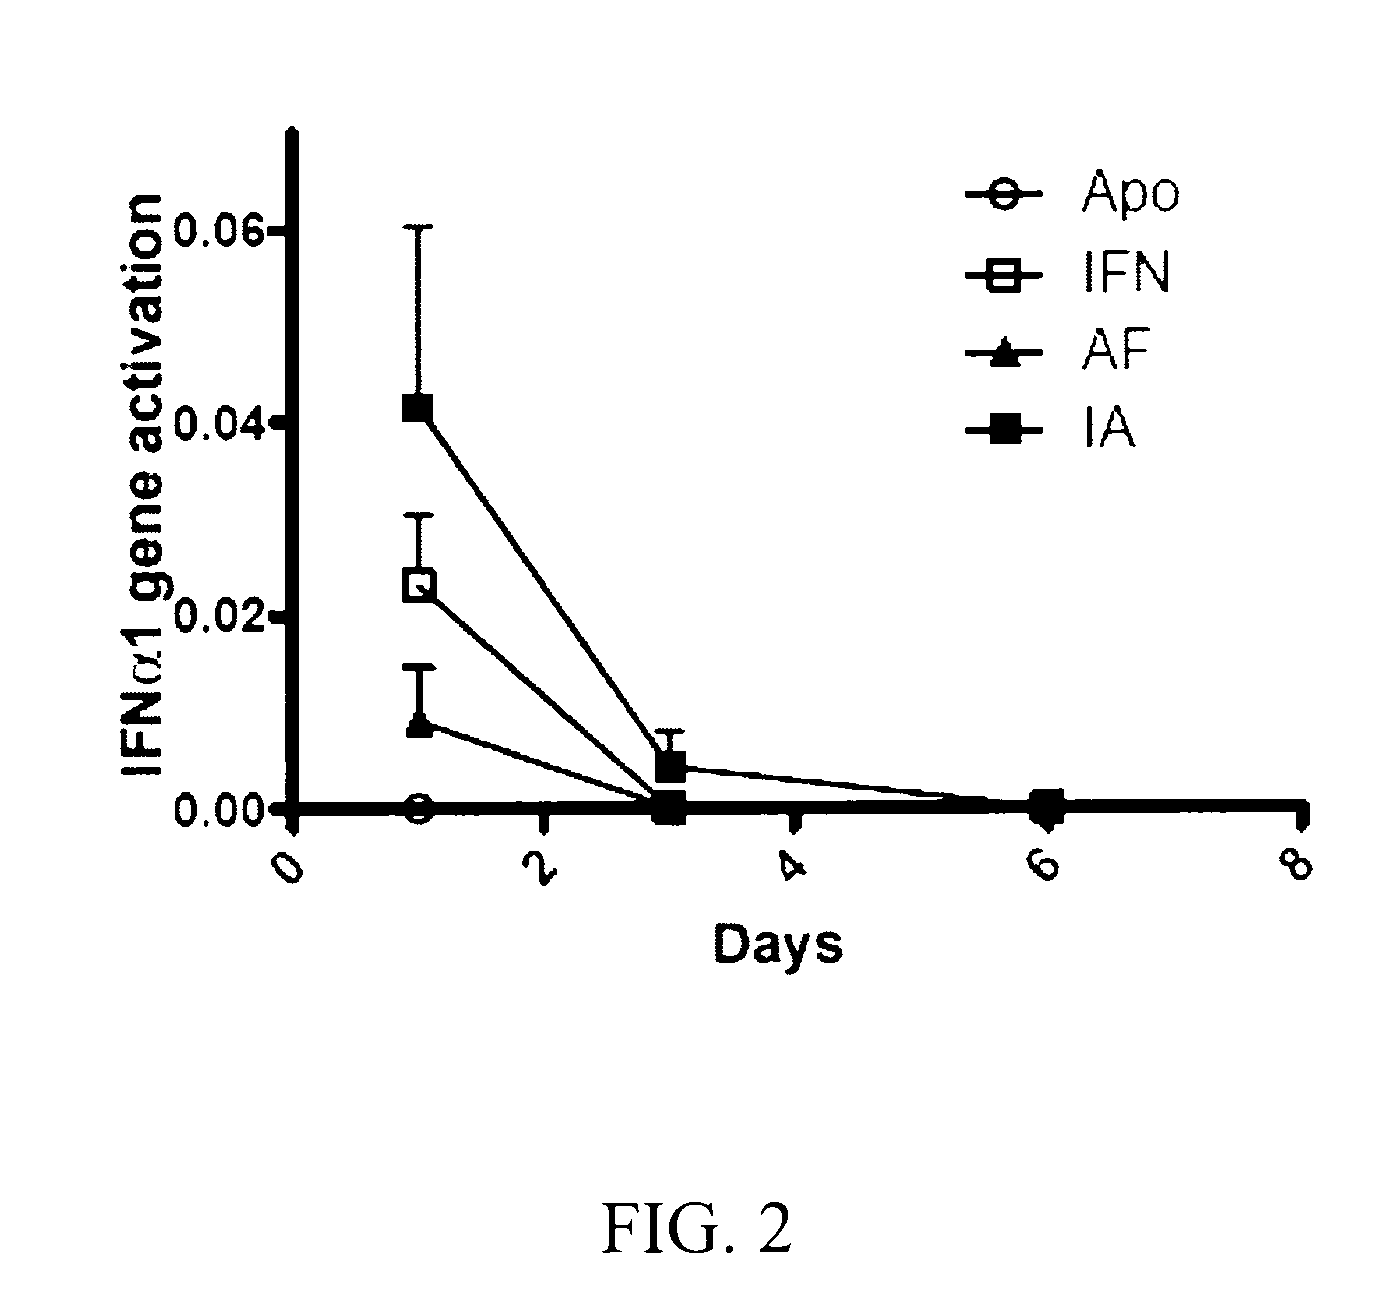 Conjugates for the administration of biologically active compounds